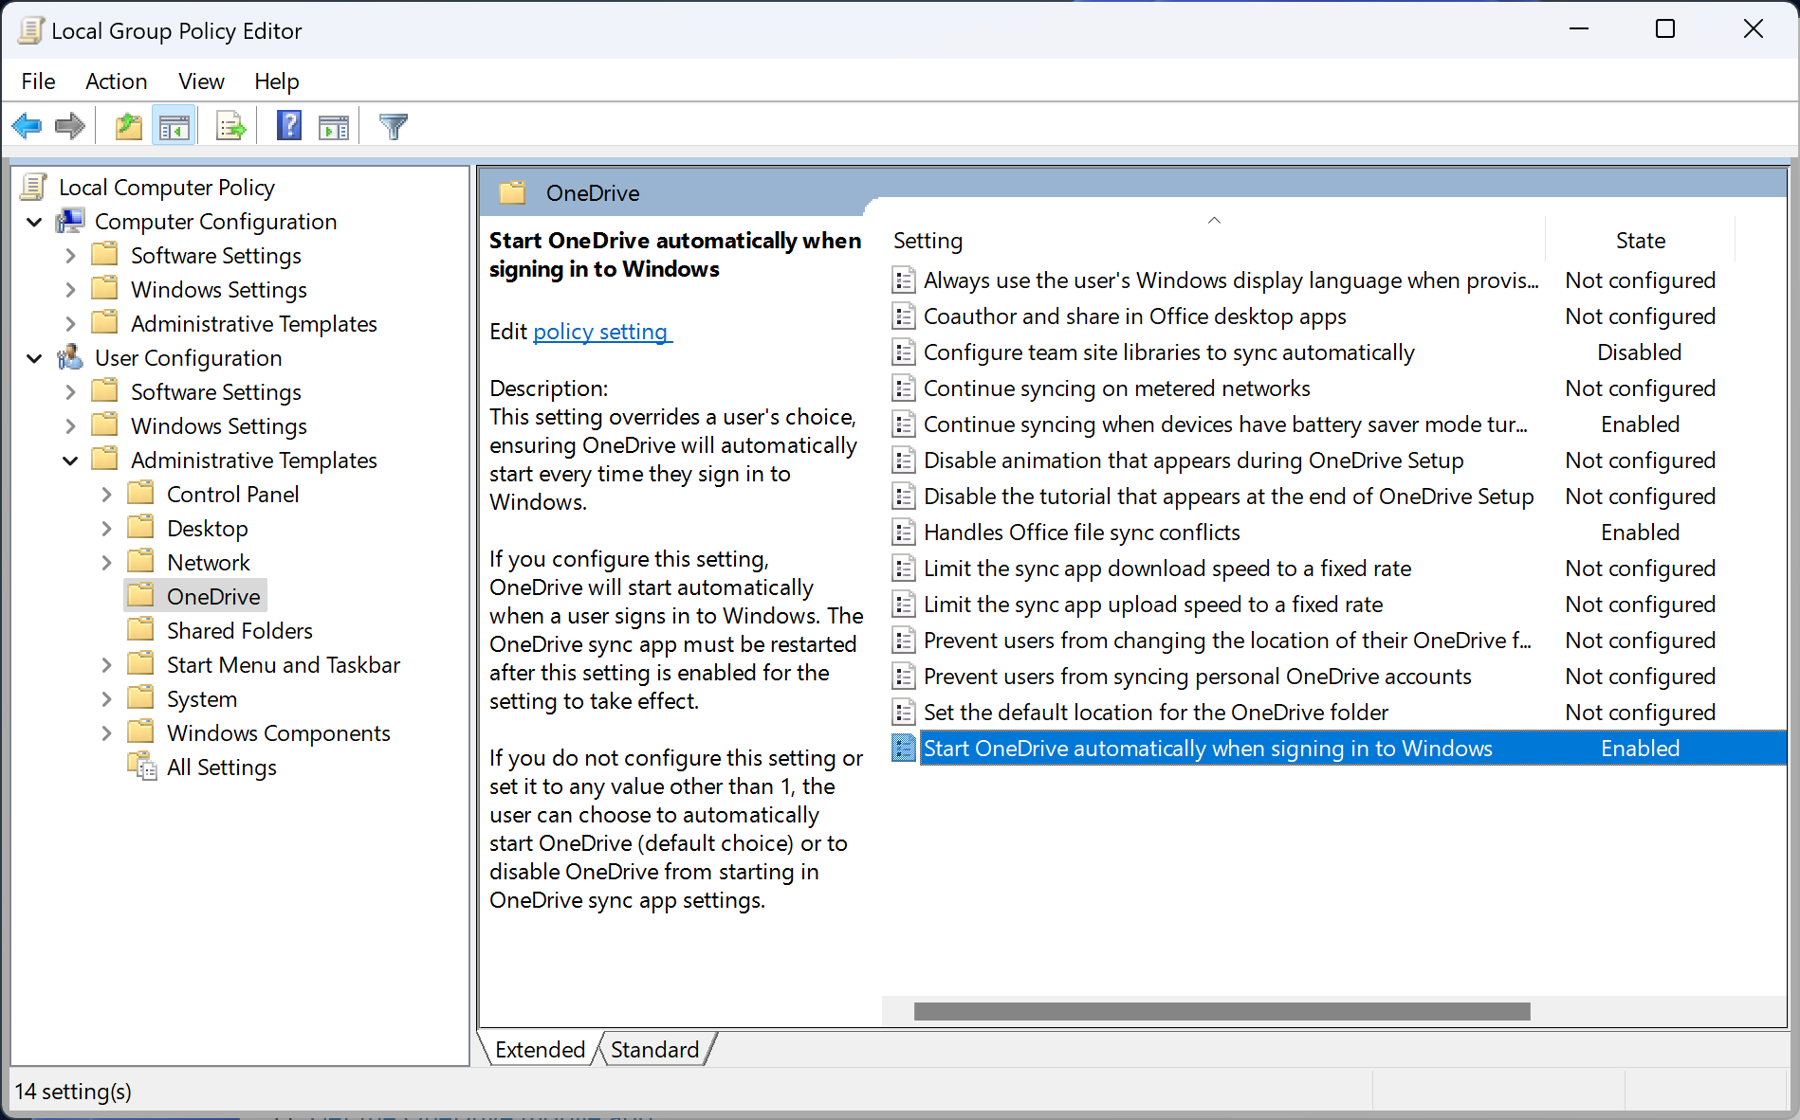 The screenshot shows the selected and enabled group policy, ”Start OneDrive automatically when signing in to Windows.”